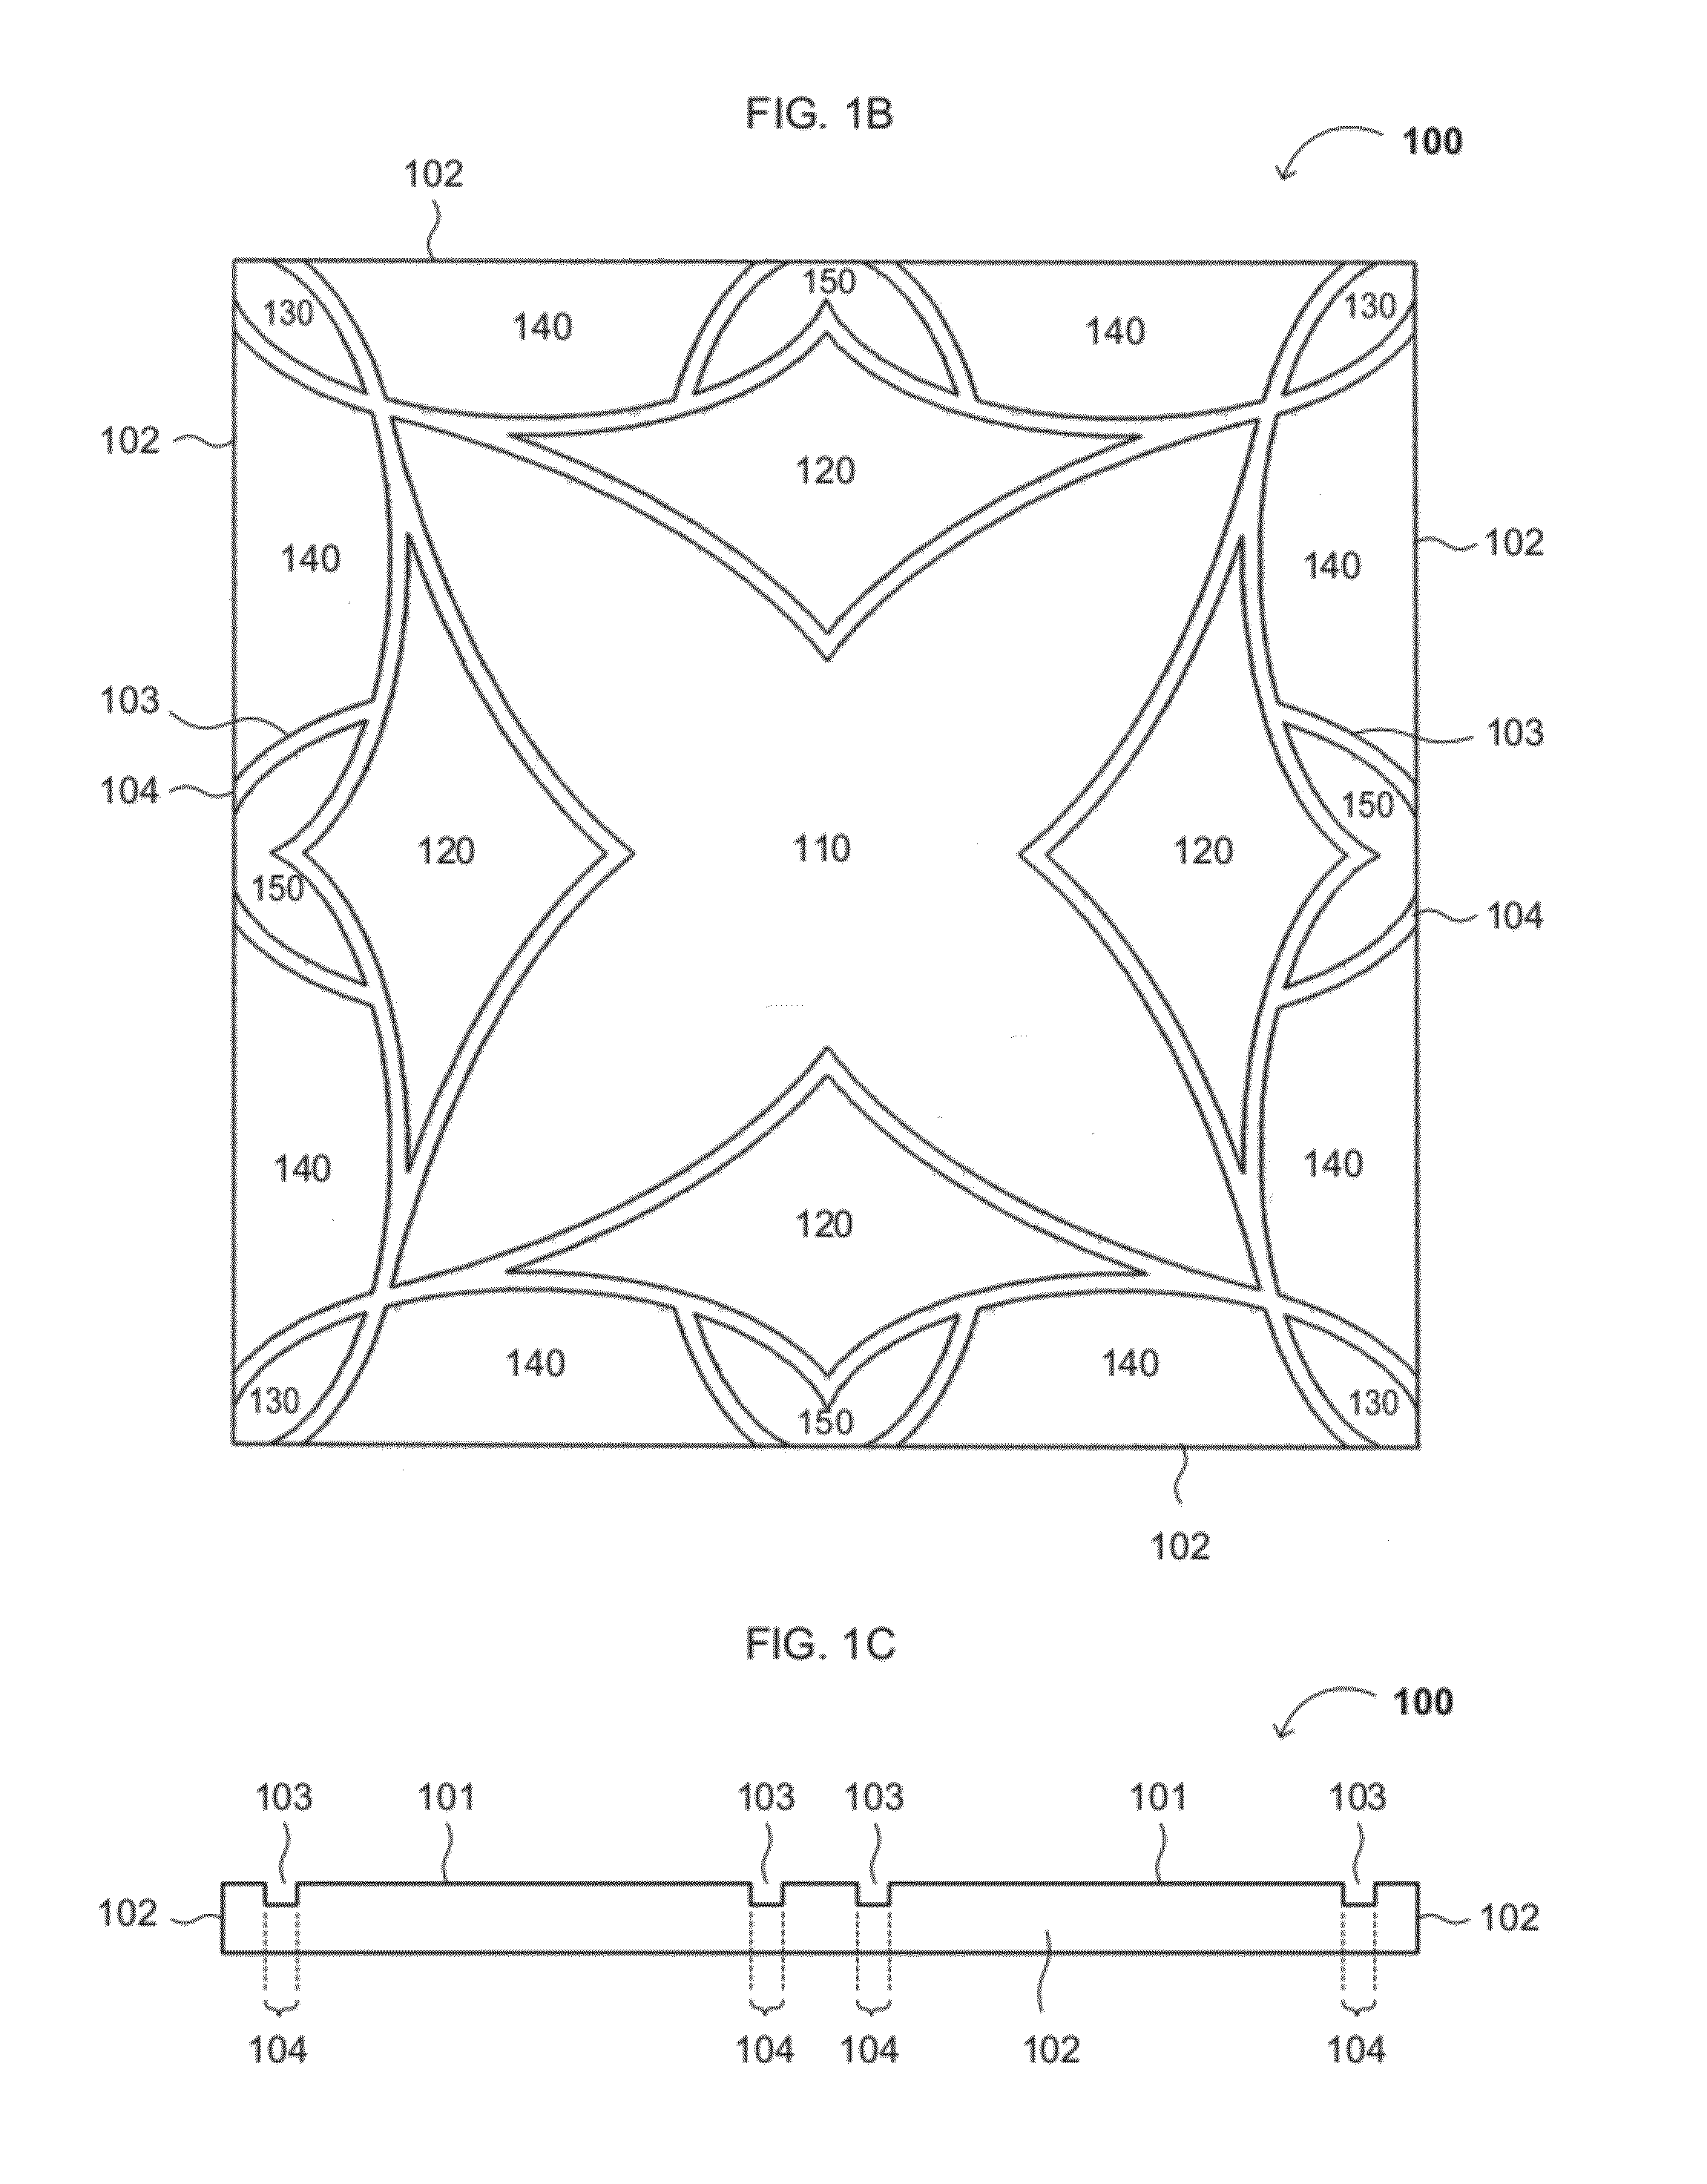 Grooved Tiles, Grooved Tile Assemblies and Related Methods